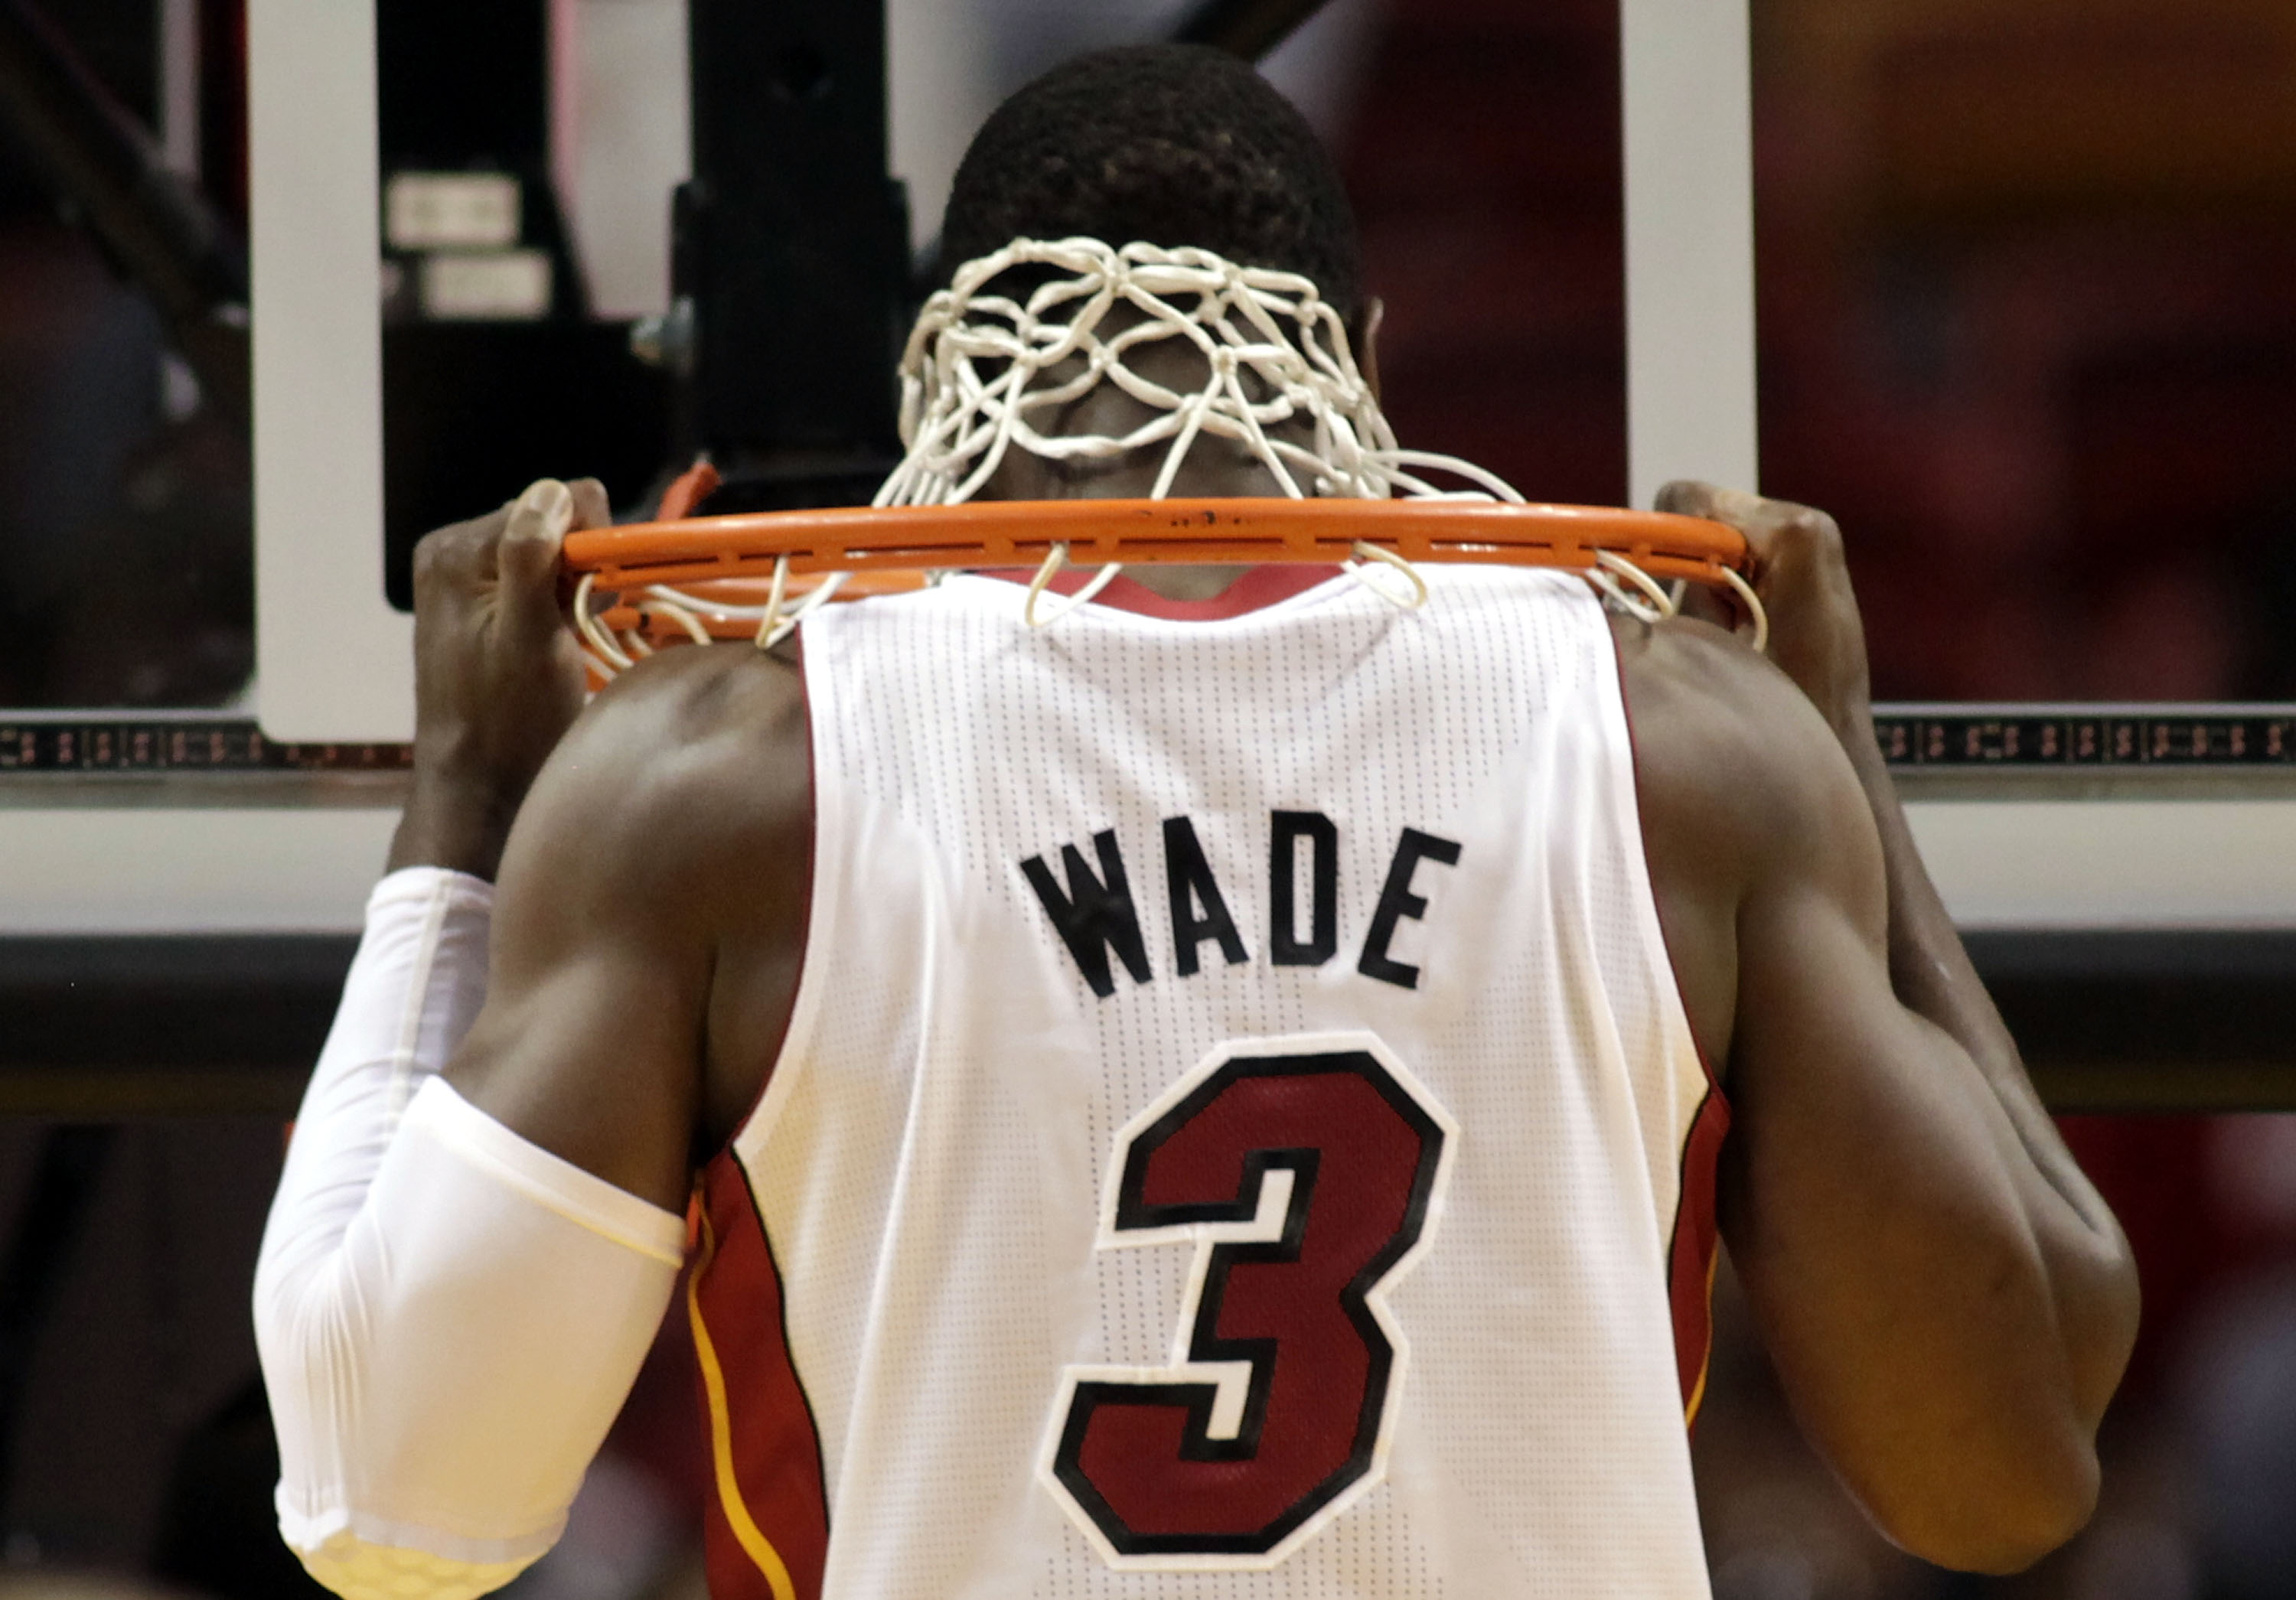 MIAMI, FL - MARCH 27:  Guard Dwyane Wade of the Miami Heat stretches against the Houston Rockets at American Airlines Arena on March 27, 2011 in Miami, Florida. NOTE TO USER: User expressly acknowledges and agrees that, by downloading and/or using this Ph